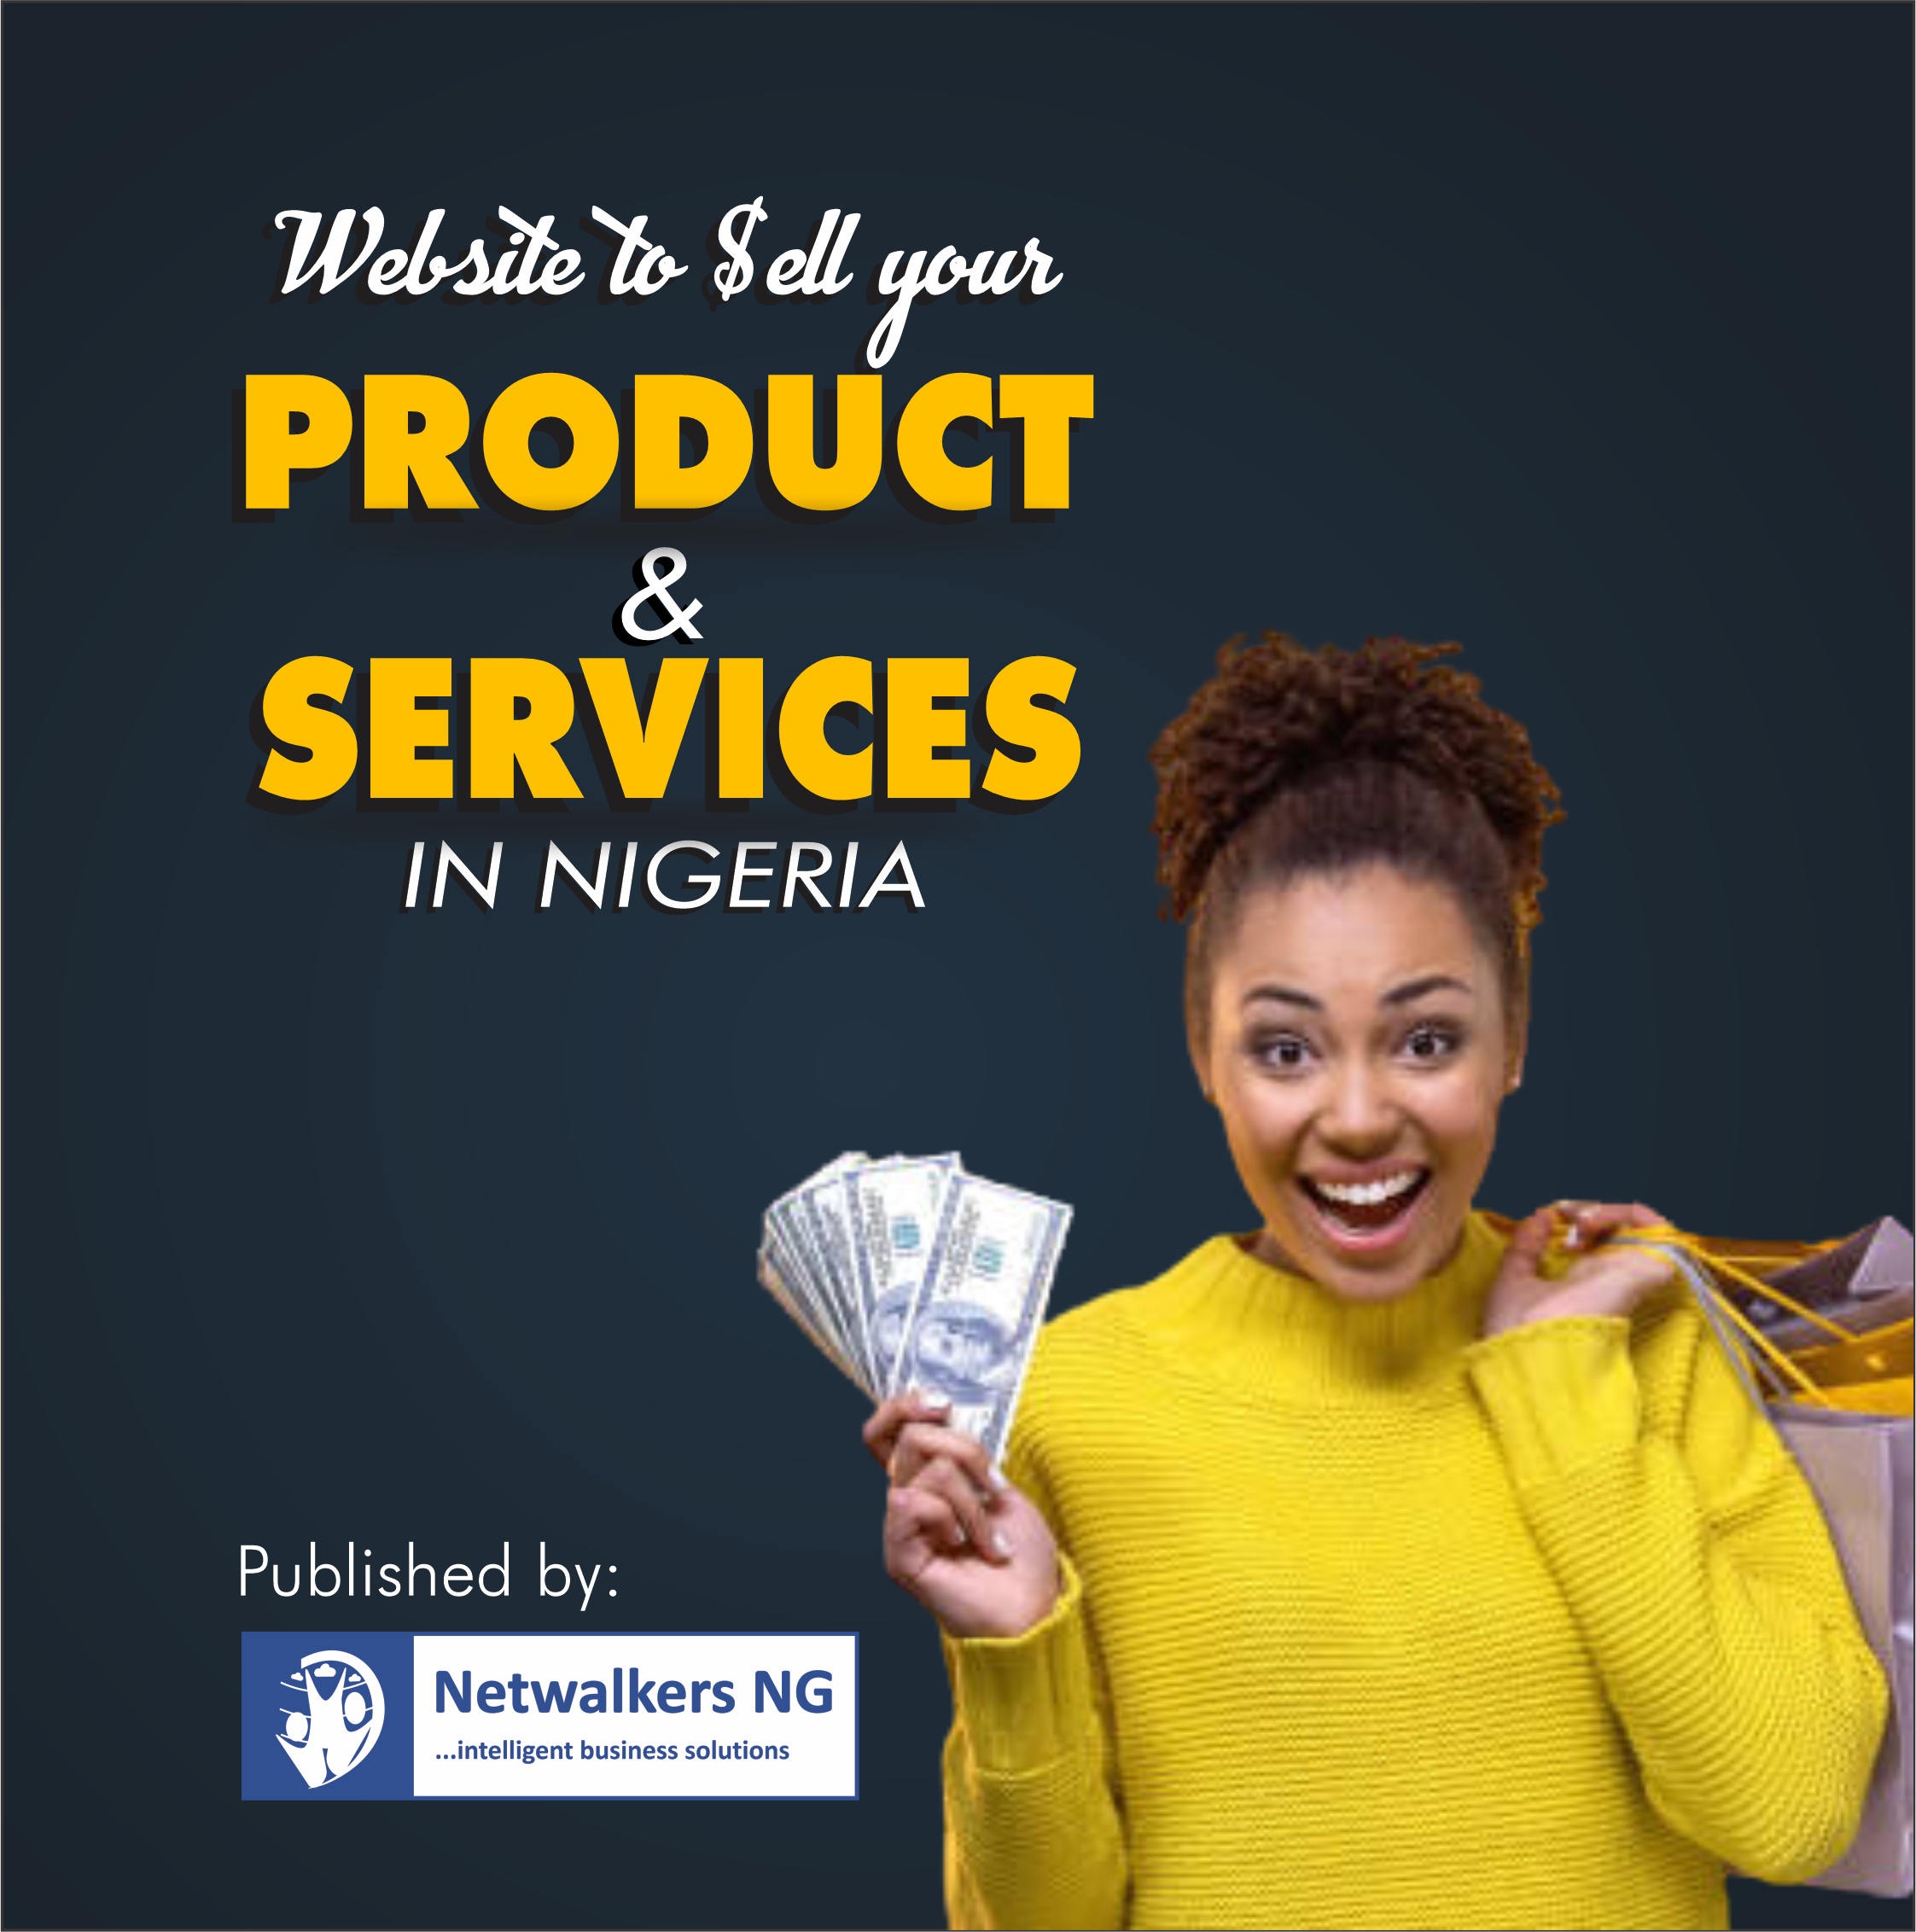 [BLOG POST] Website to sell your product and services in Nigeria